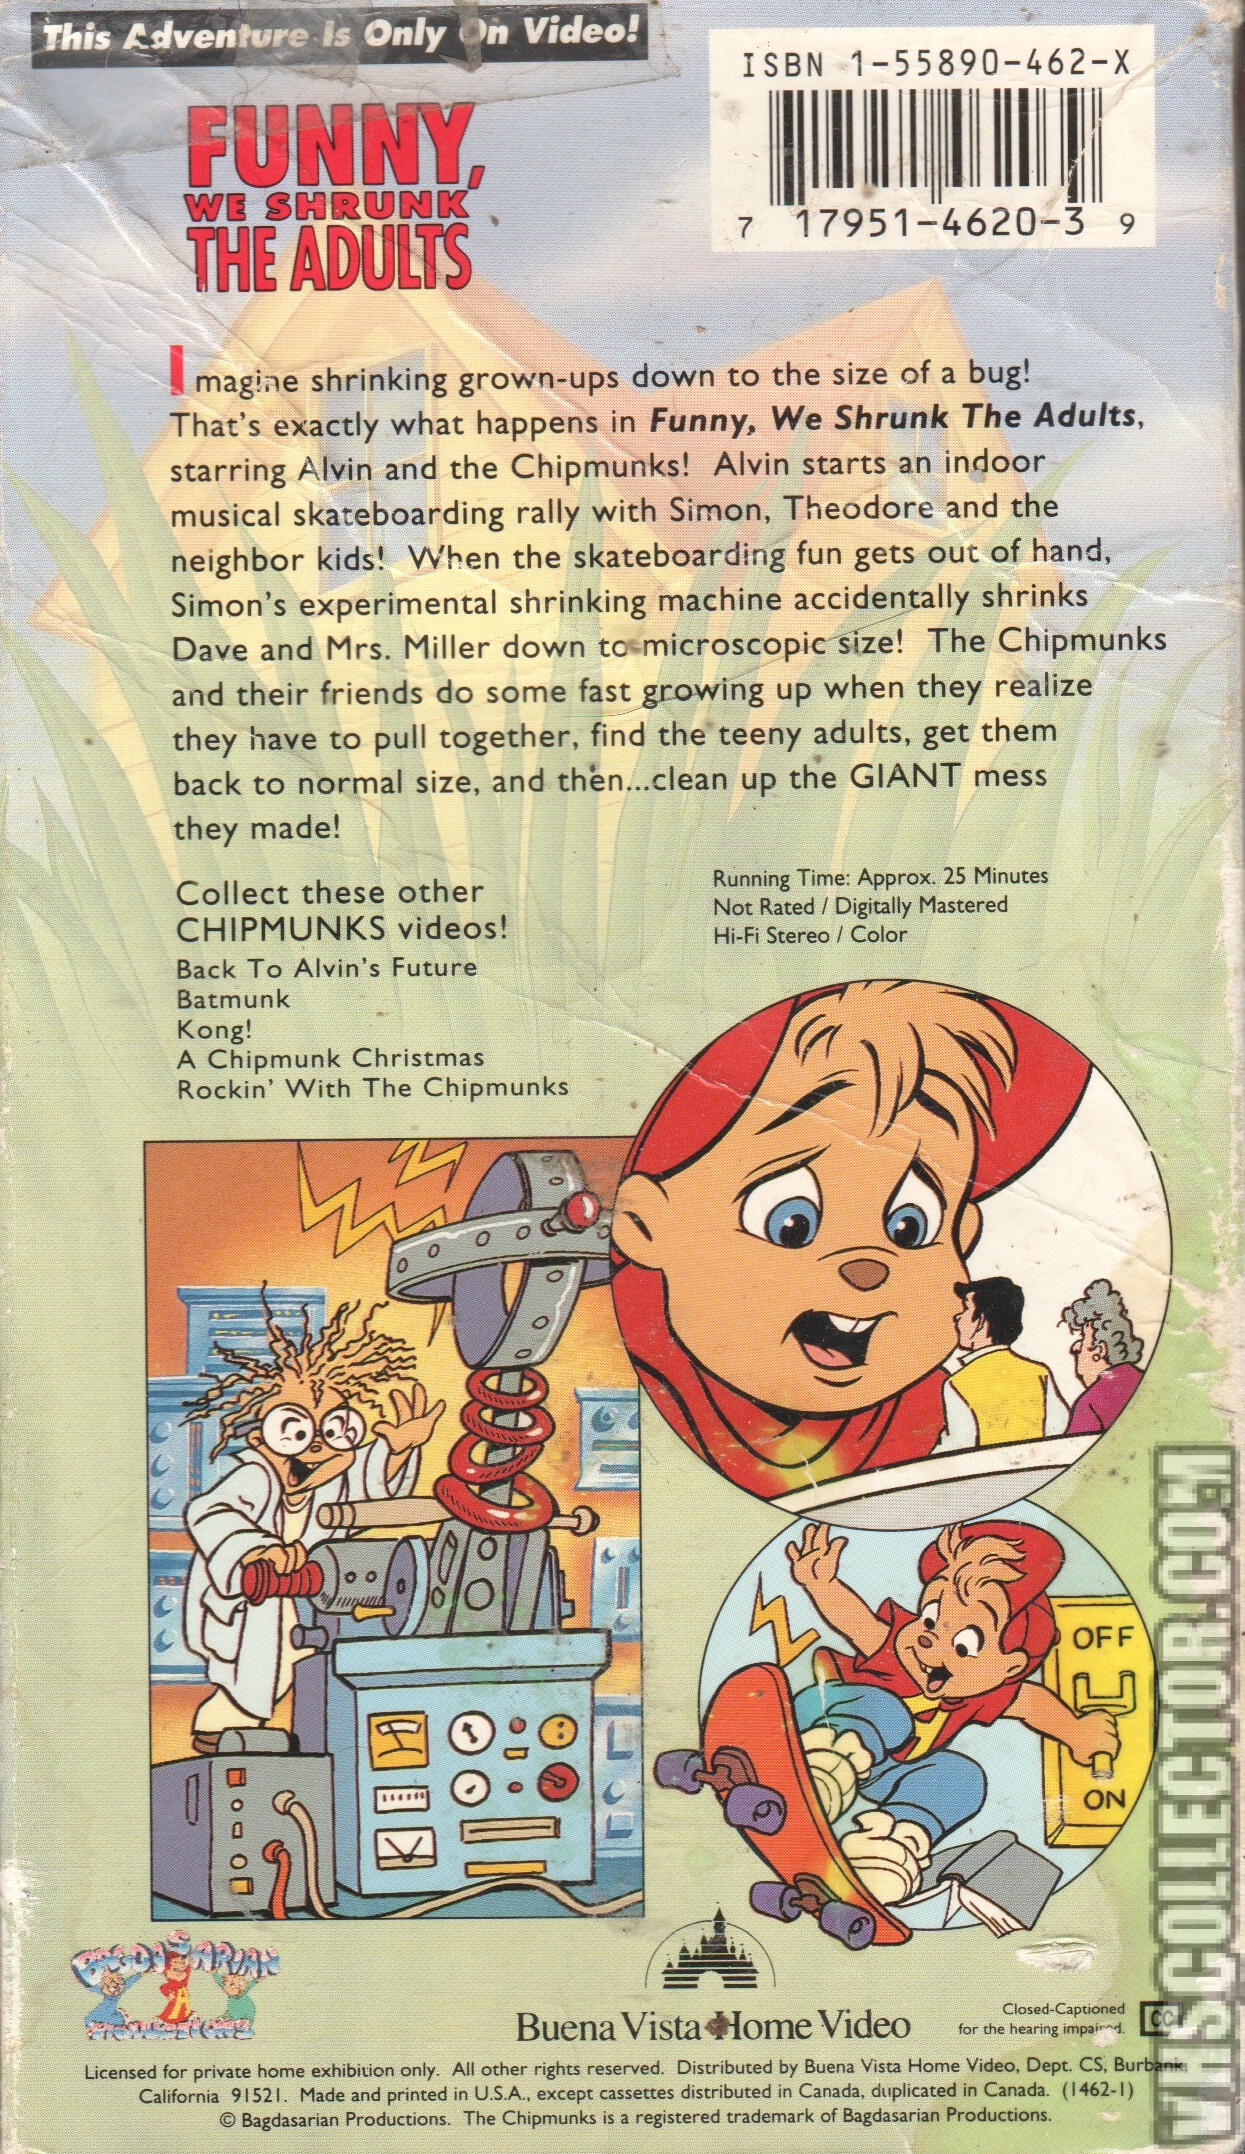 31795_Alvin%2520And%2520The%2520Chipmunks%2520Funny%2520We%2520Shrunk%2520The%2520Adults%2520VHS%2520Back%2520Cover.jpg